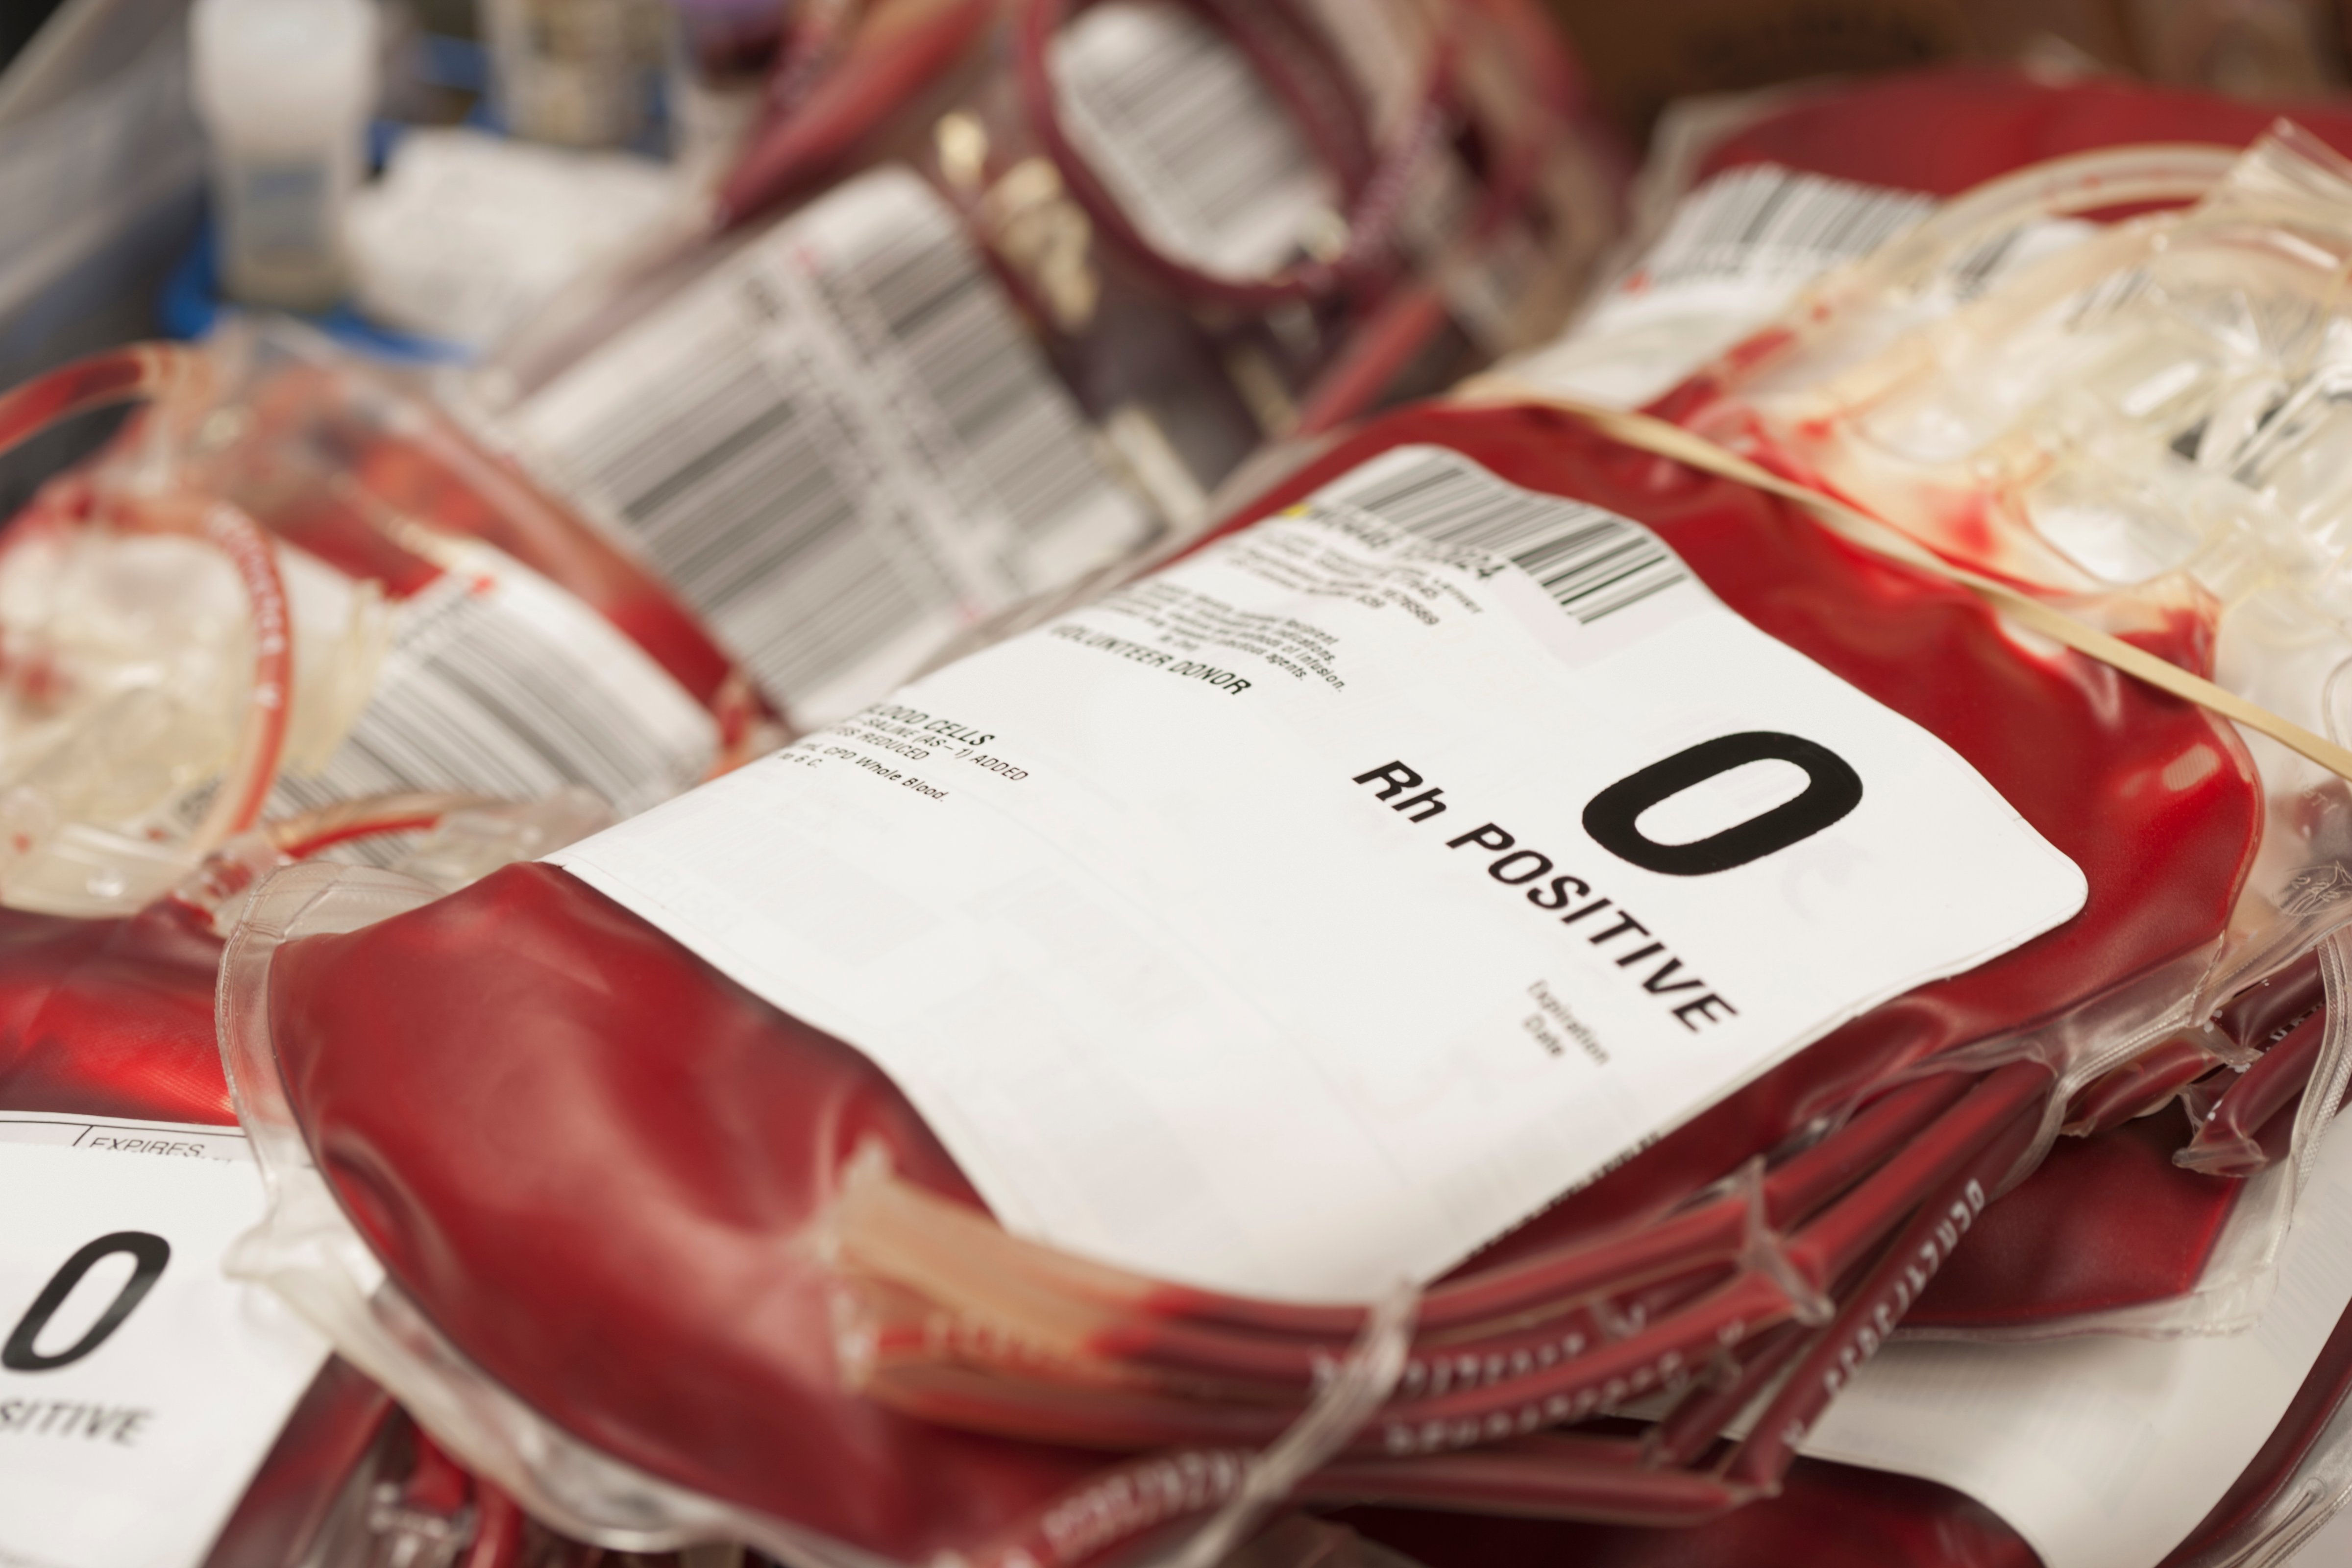 Pouches of donated blood in hospital